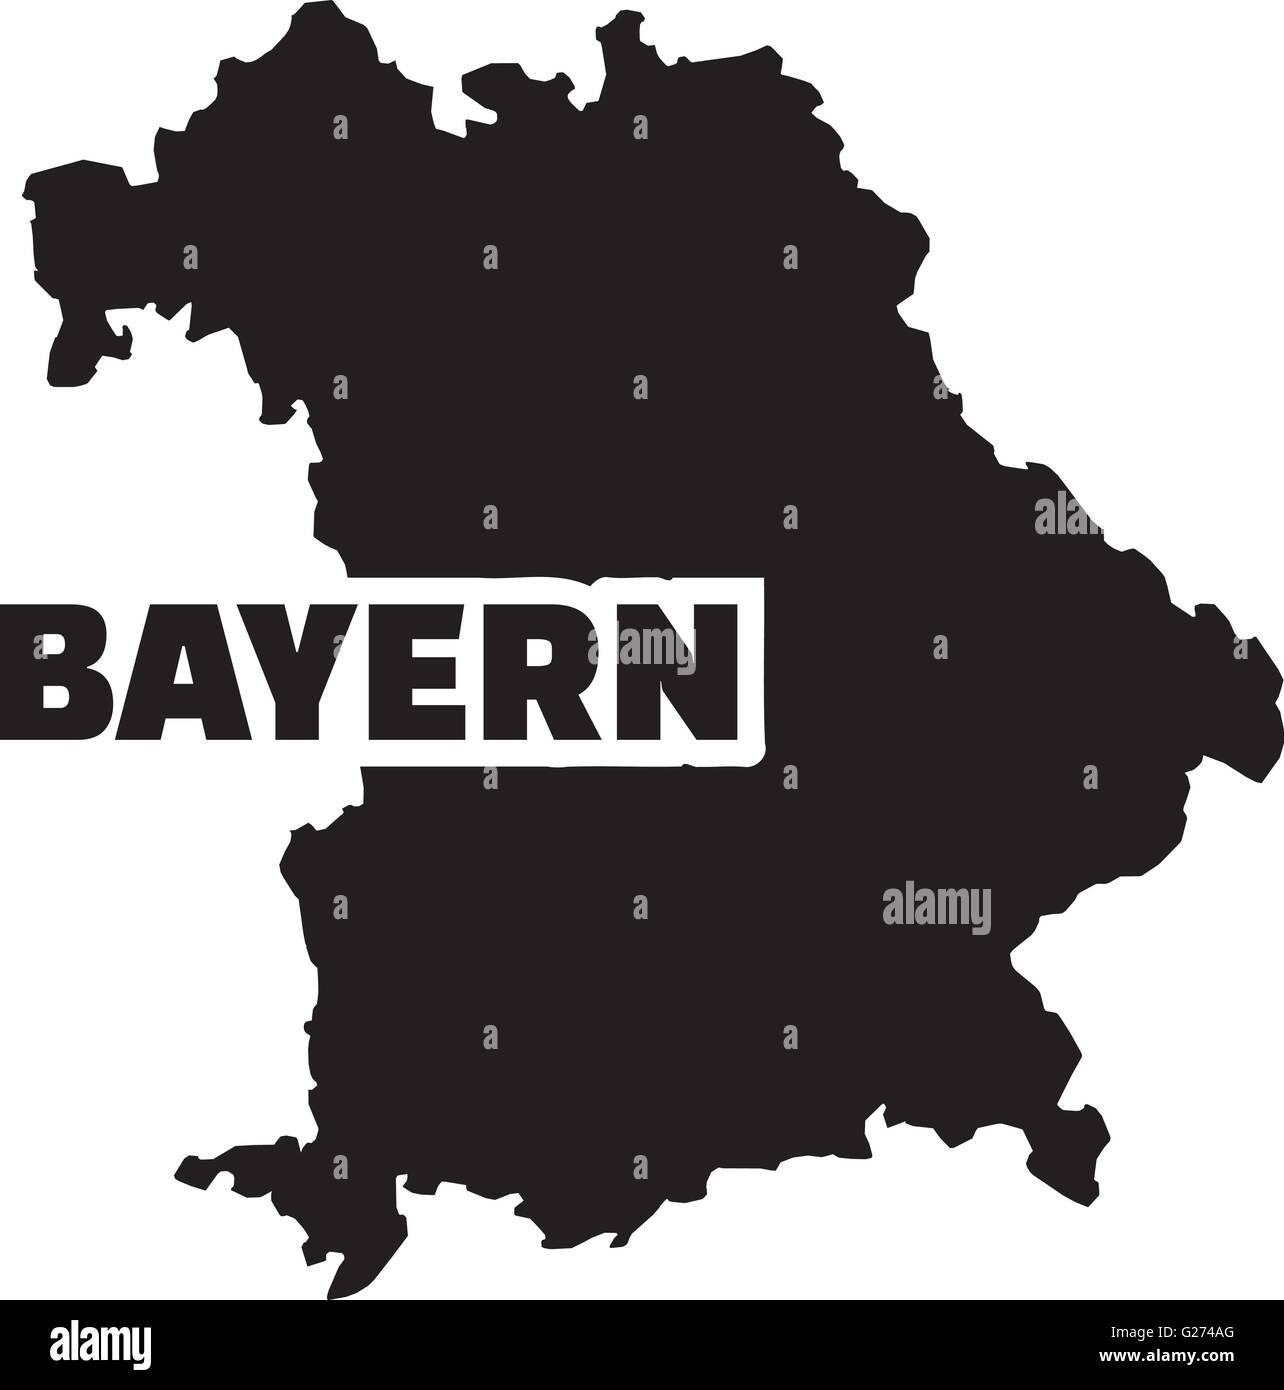 Bavaria map with german title Stock Vector